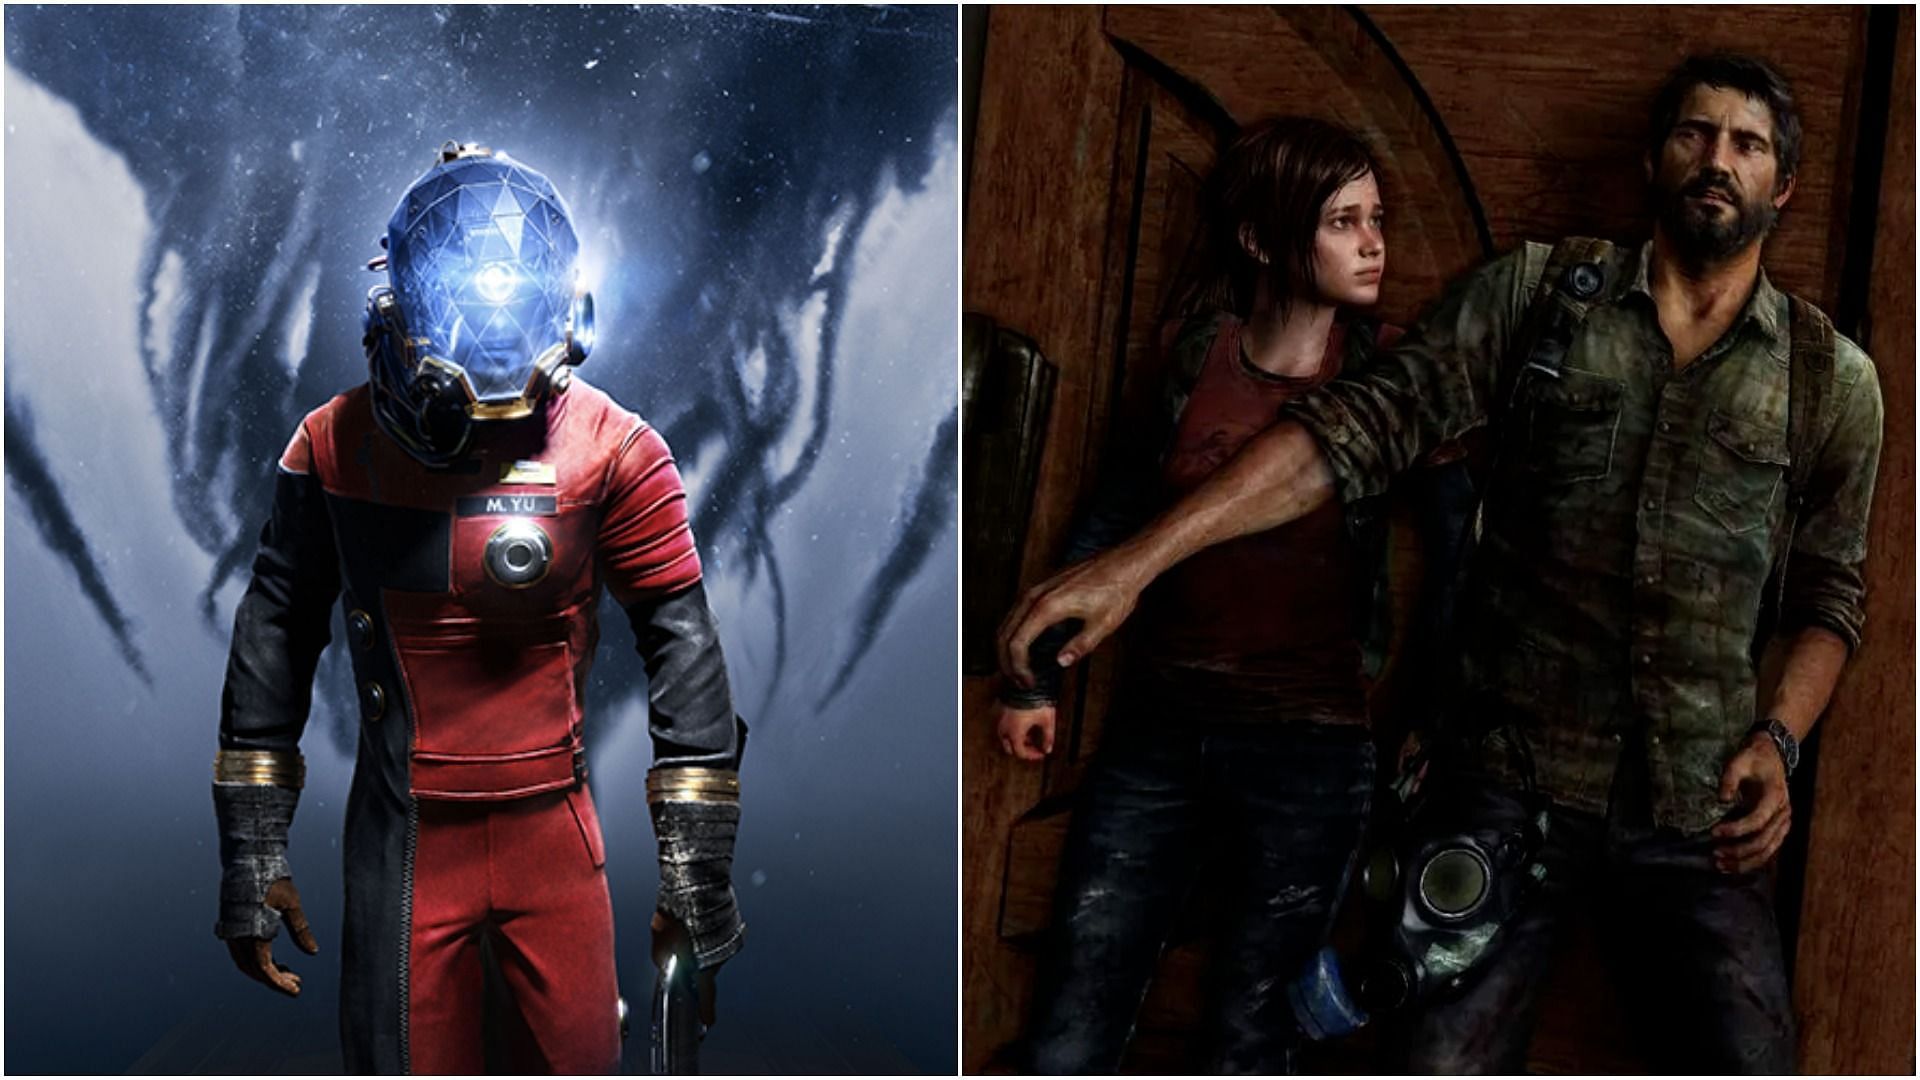 Great horror games to play in 2022 (Image via Bethesda Softworks and Sony Computer Entertainment)